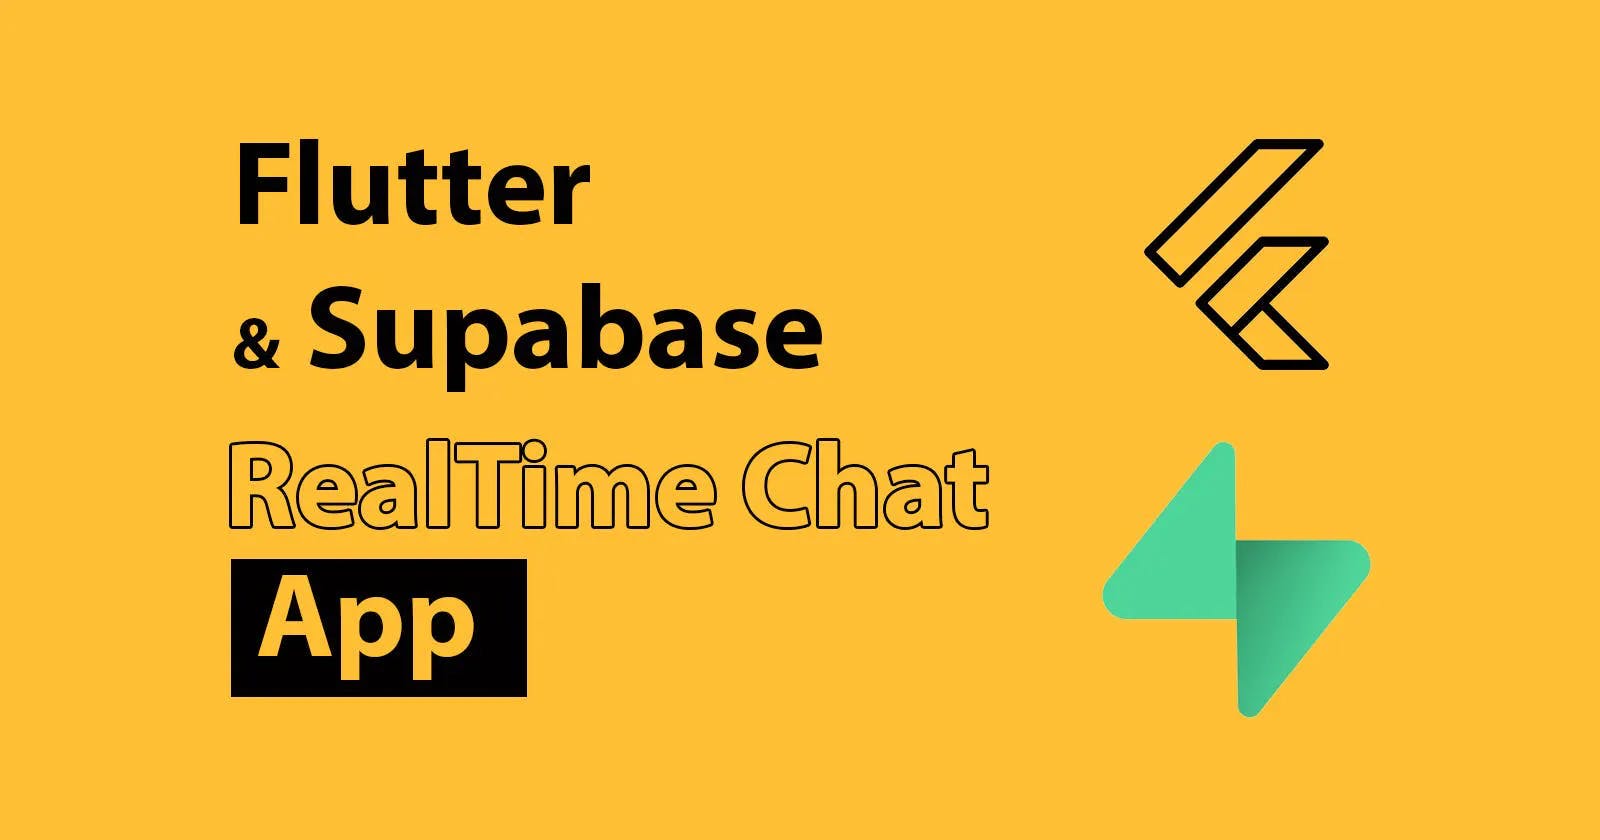 Create Realtime Chat App using Flutter and Supabase - Part 2